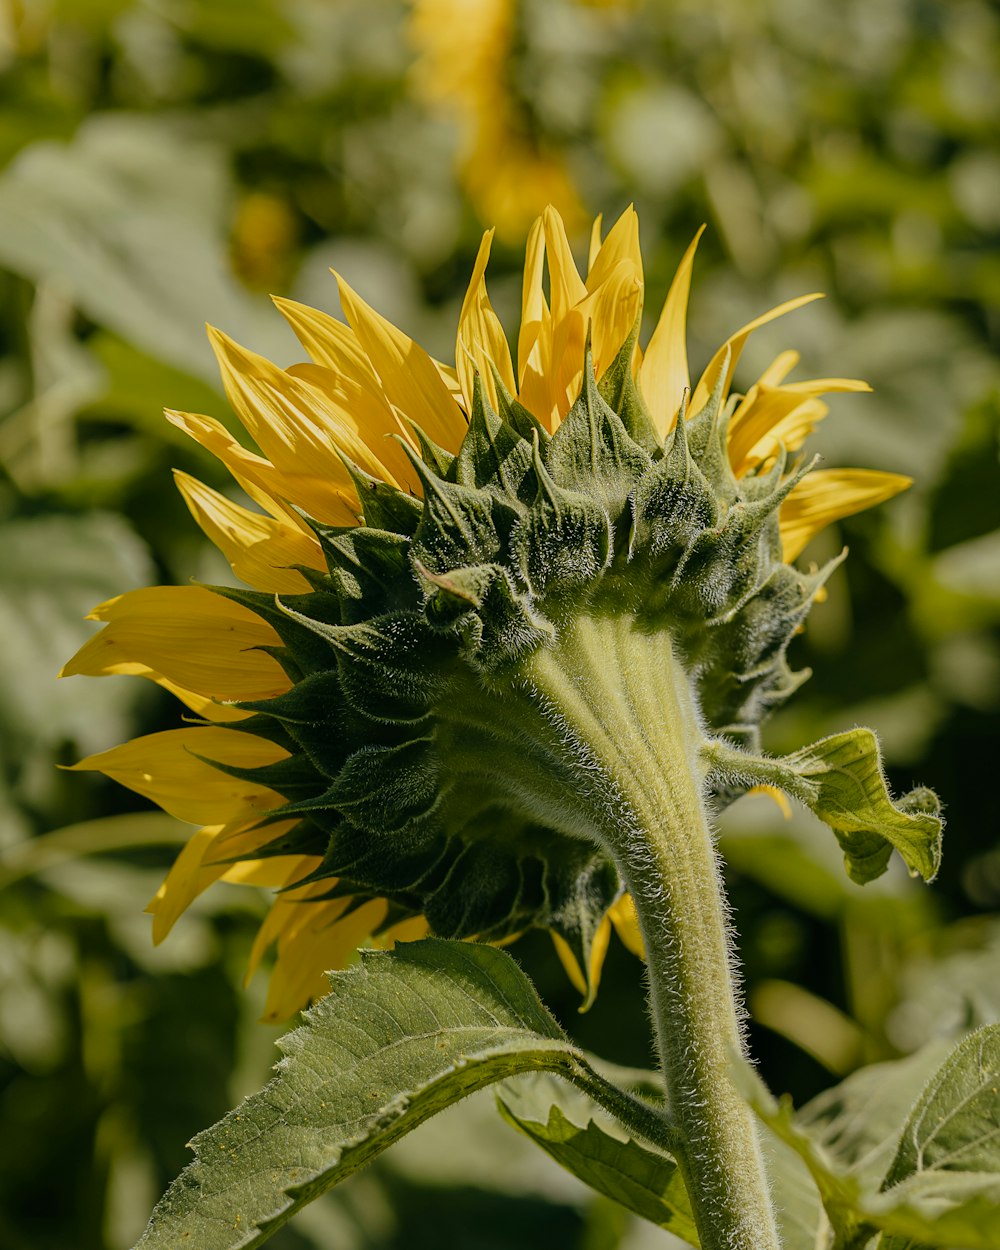 a close up of a sunflower in a field